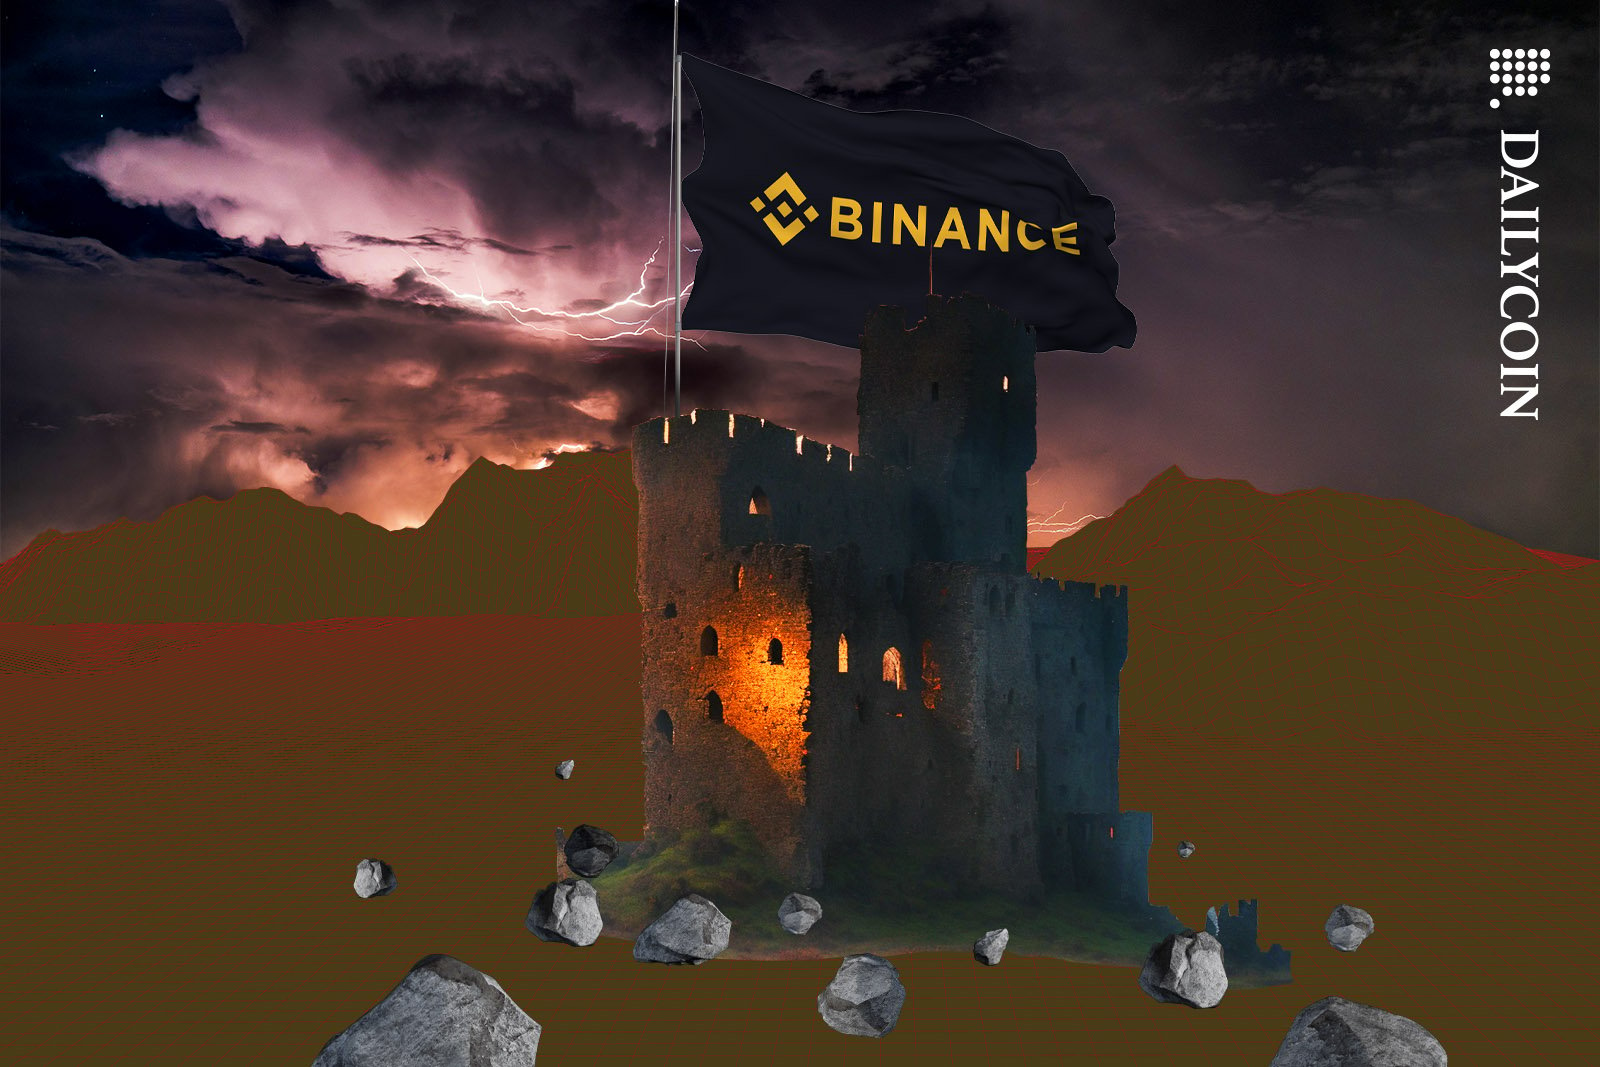 An old ruined casle with a large Binance flag on it.